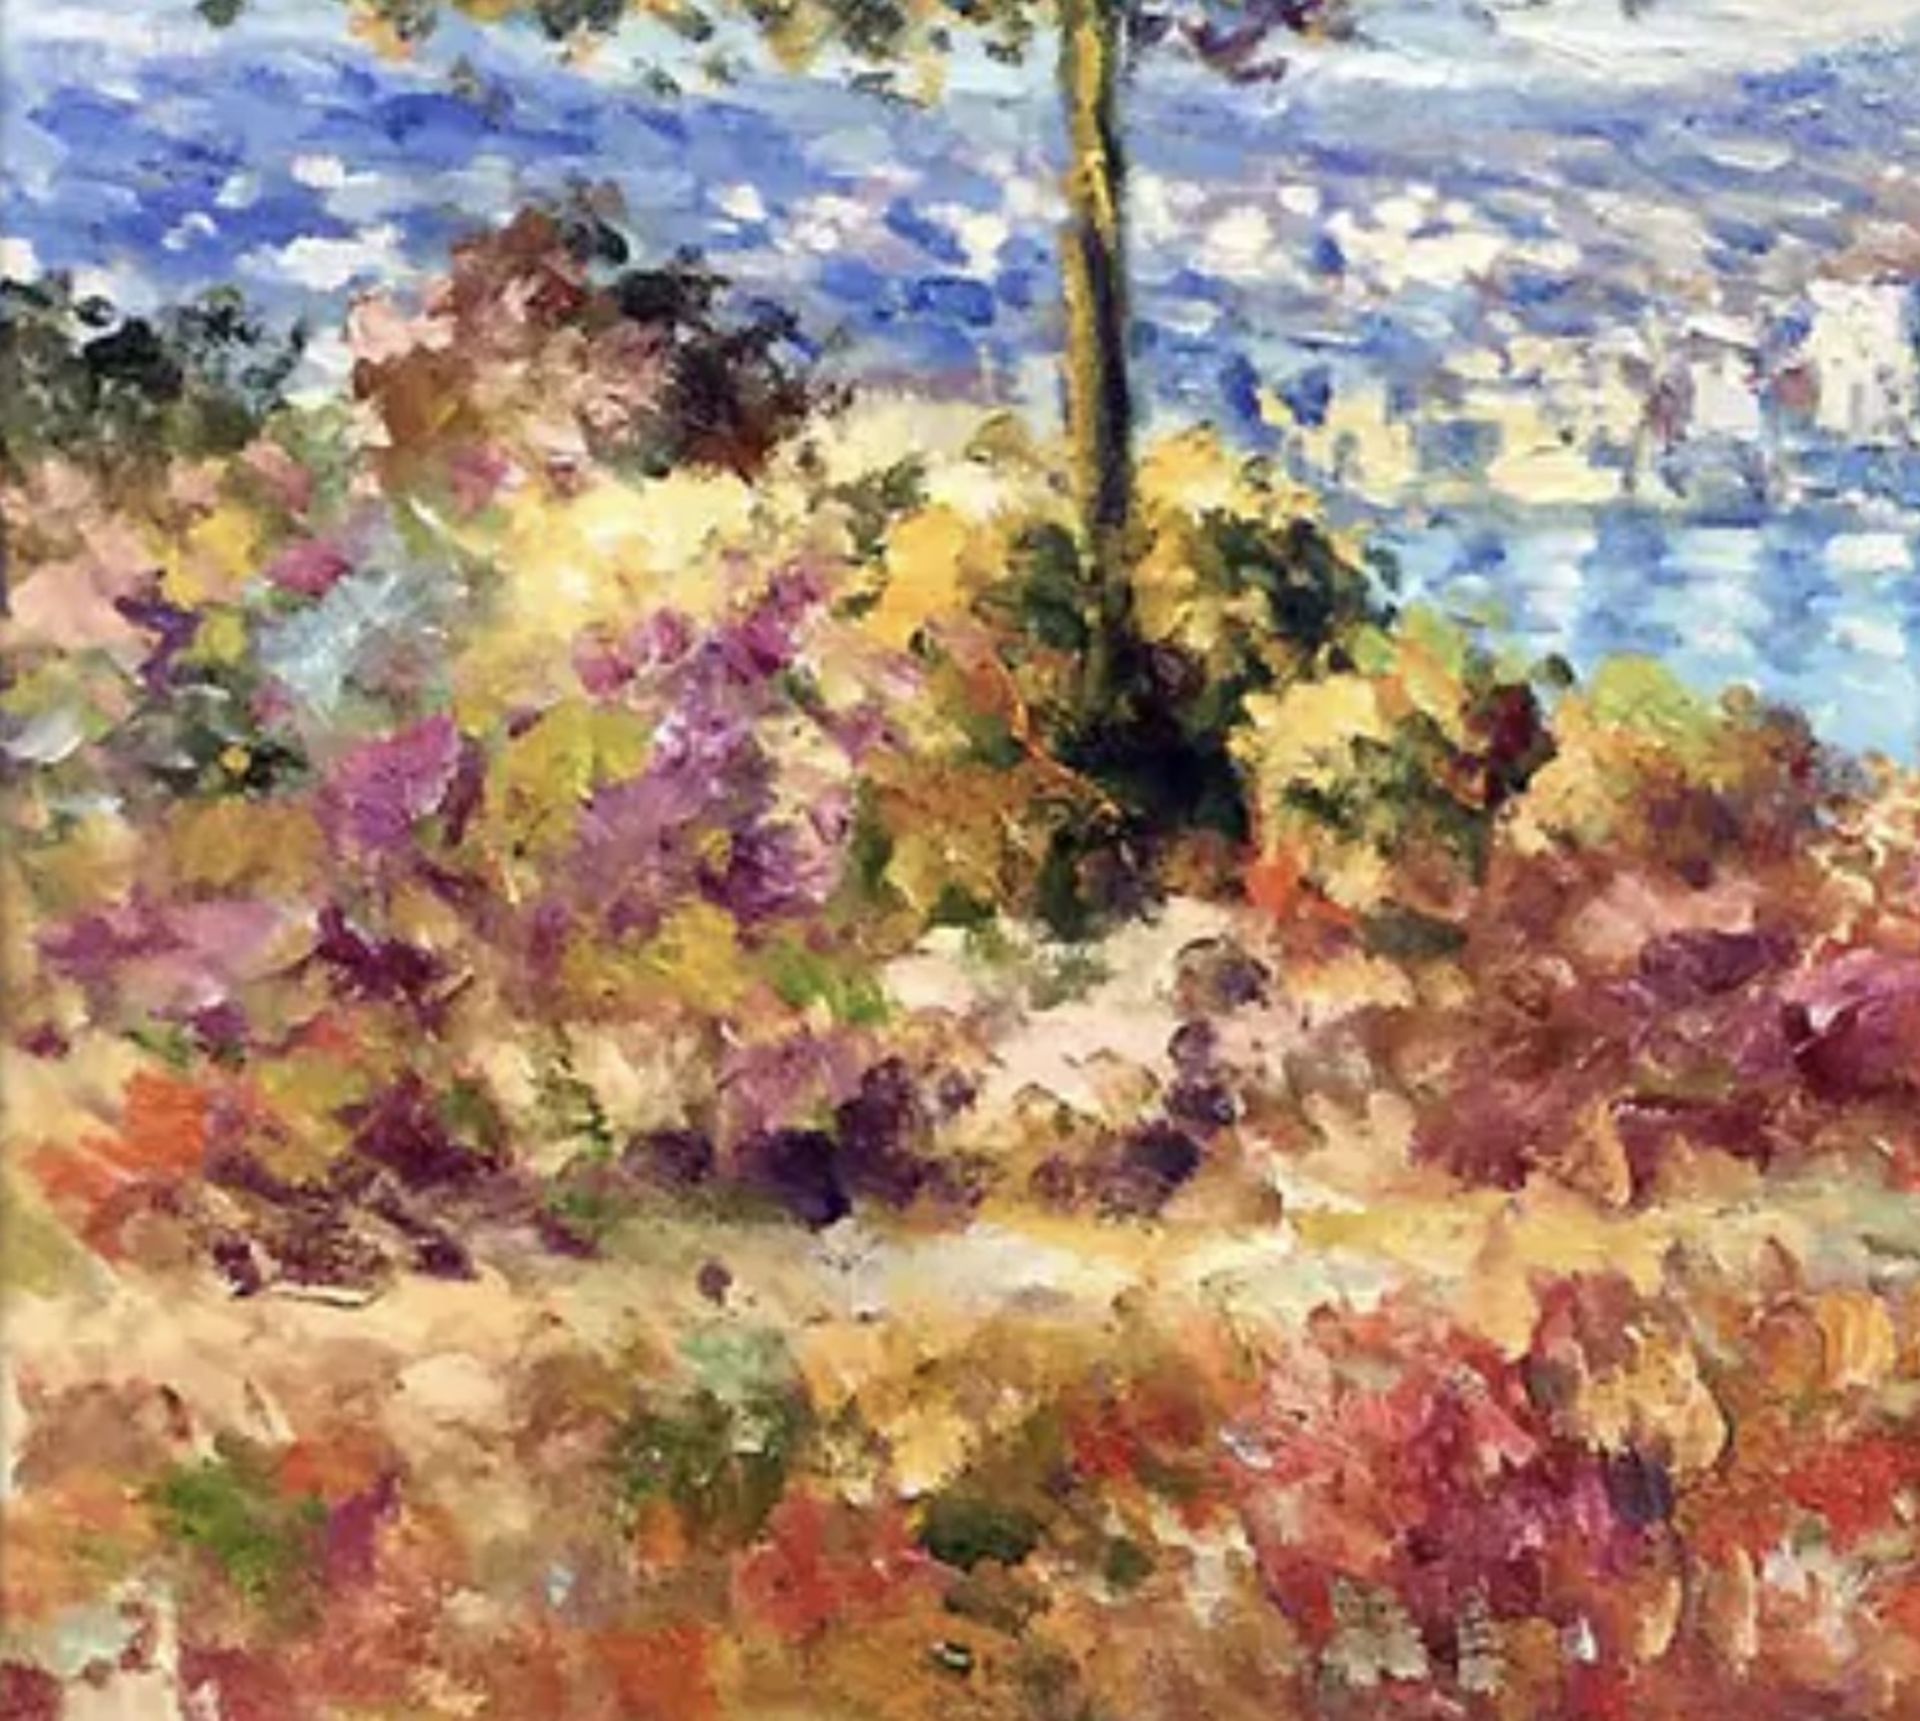 Claude Monet "Antibes, 1888" Oil Painting, After - Image 5 of 6